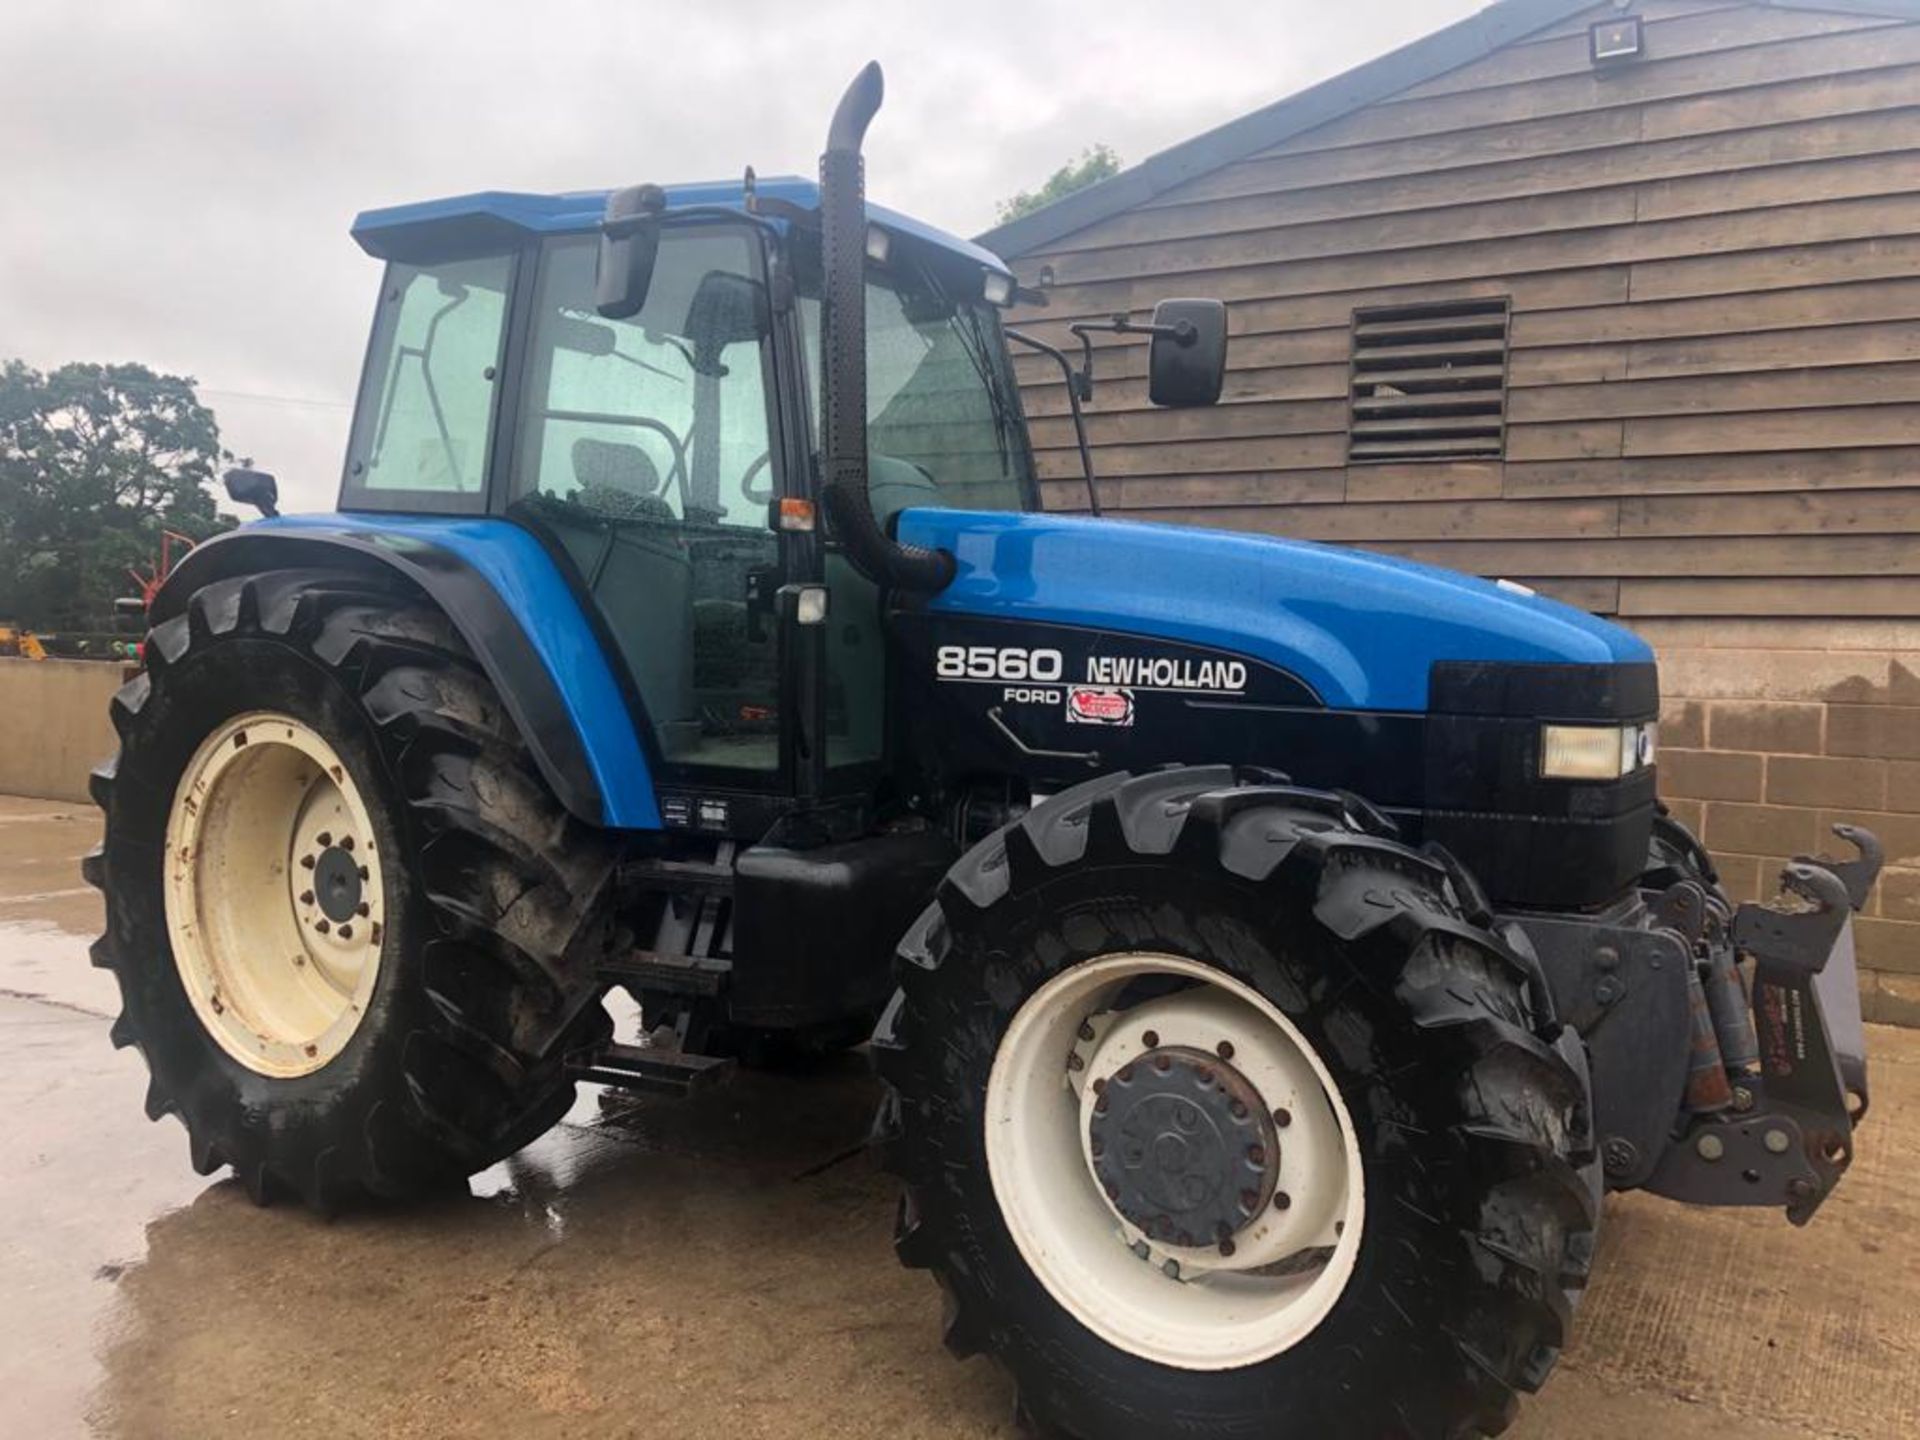 NEW HOLLAND 8560 4WD TRACTOR